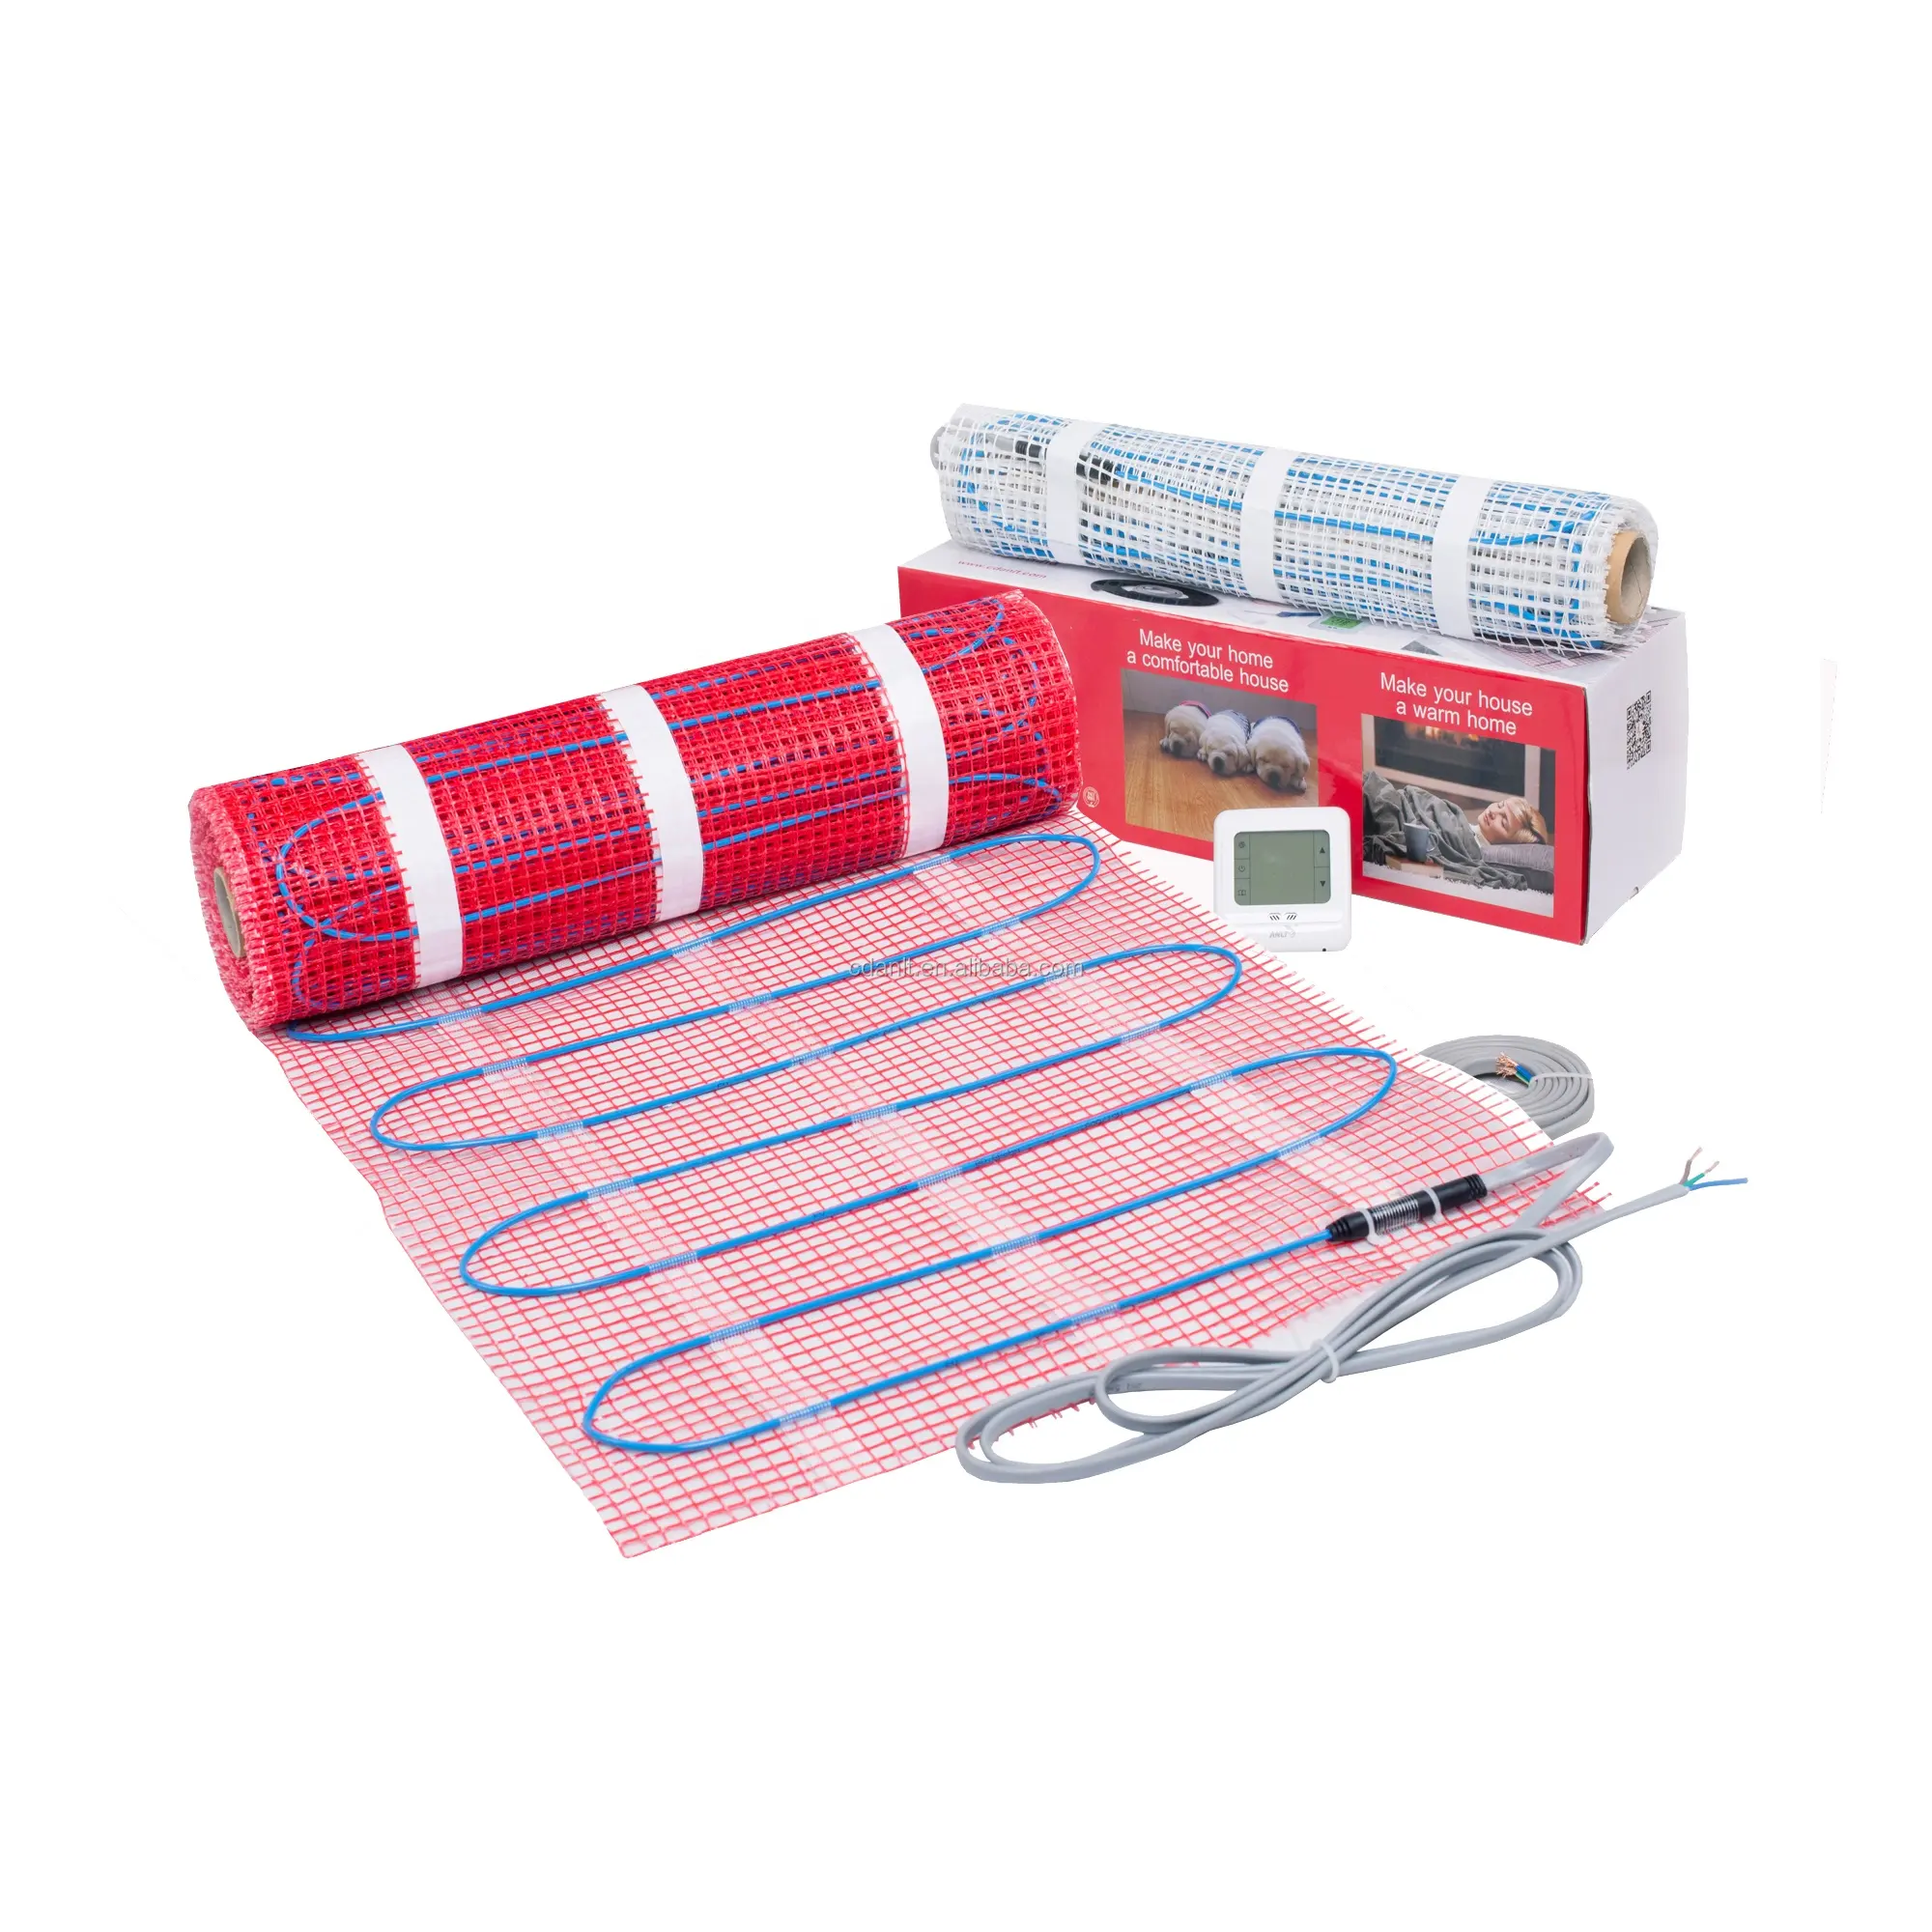 Quick Warm-up Timer Underfloor Heating Mats Electric Heating Elements